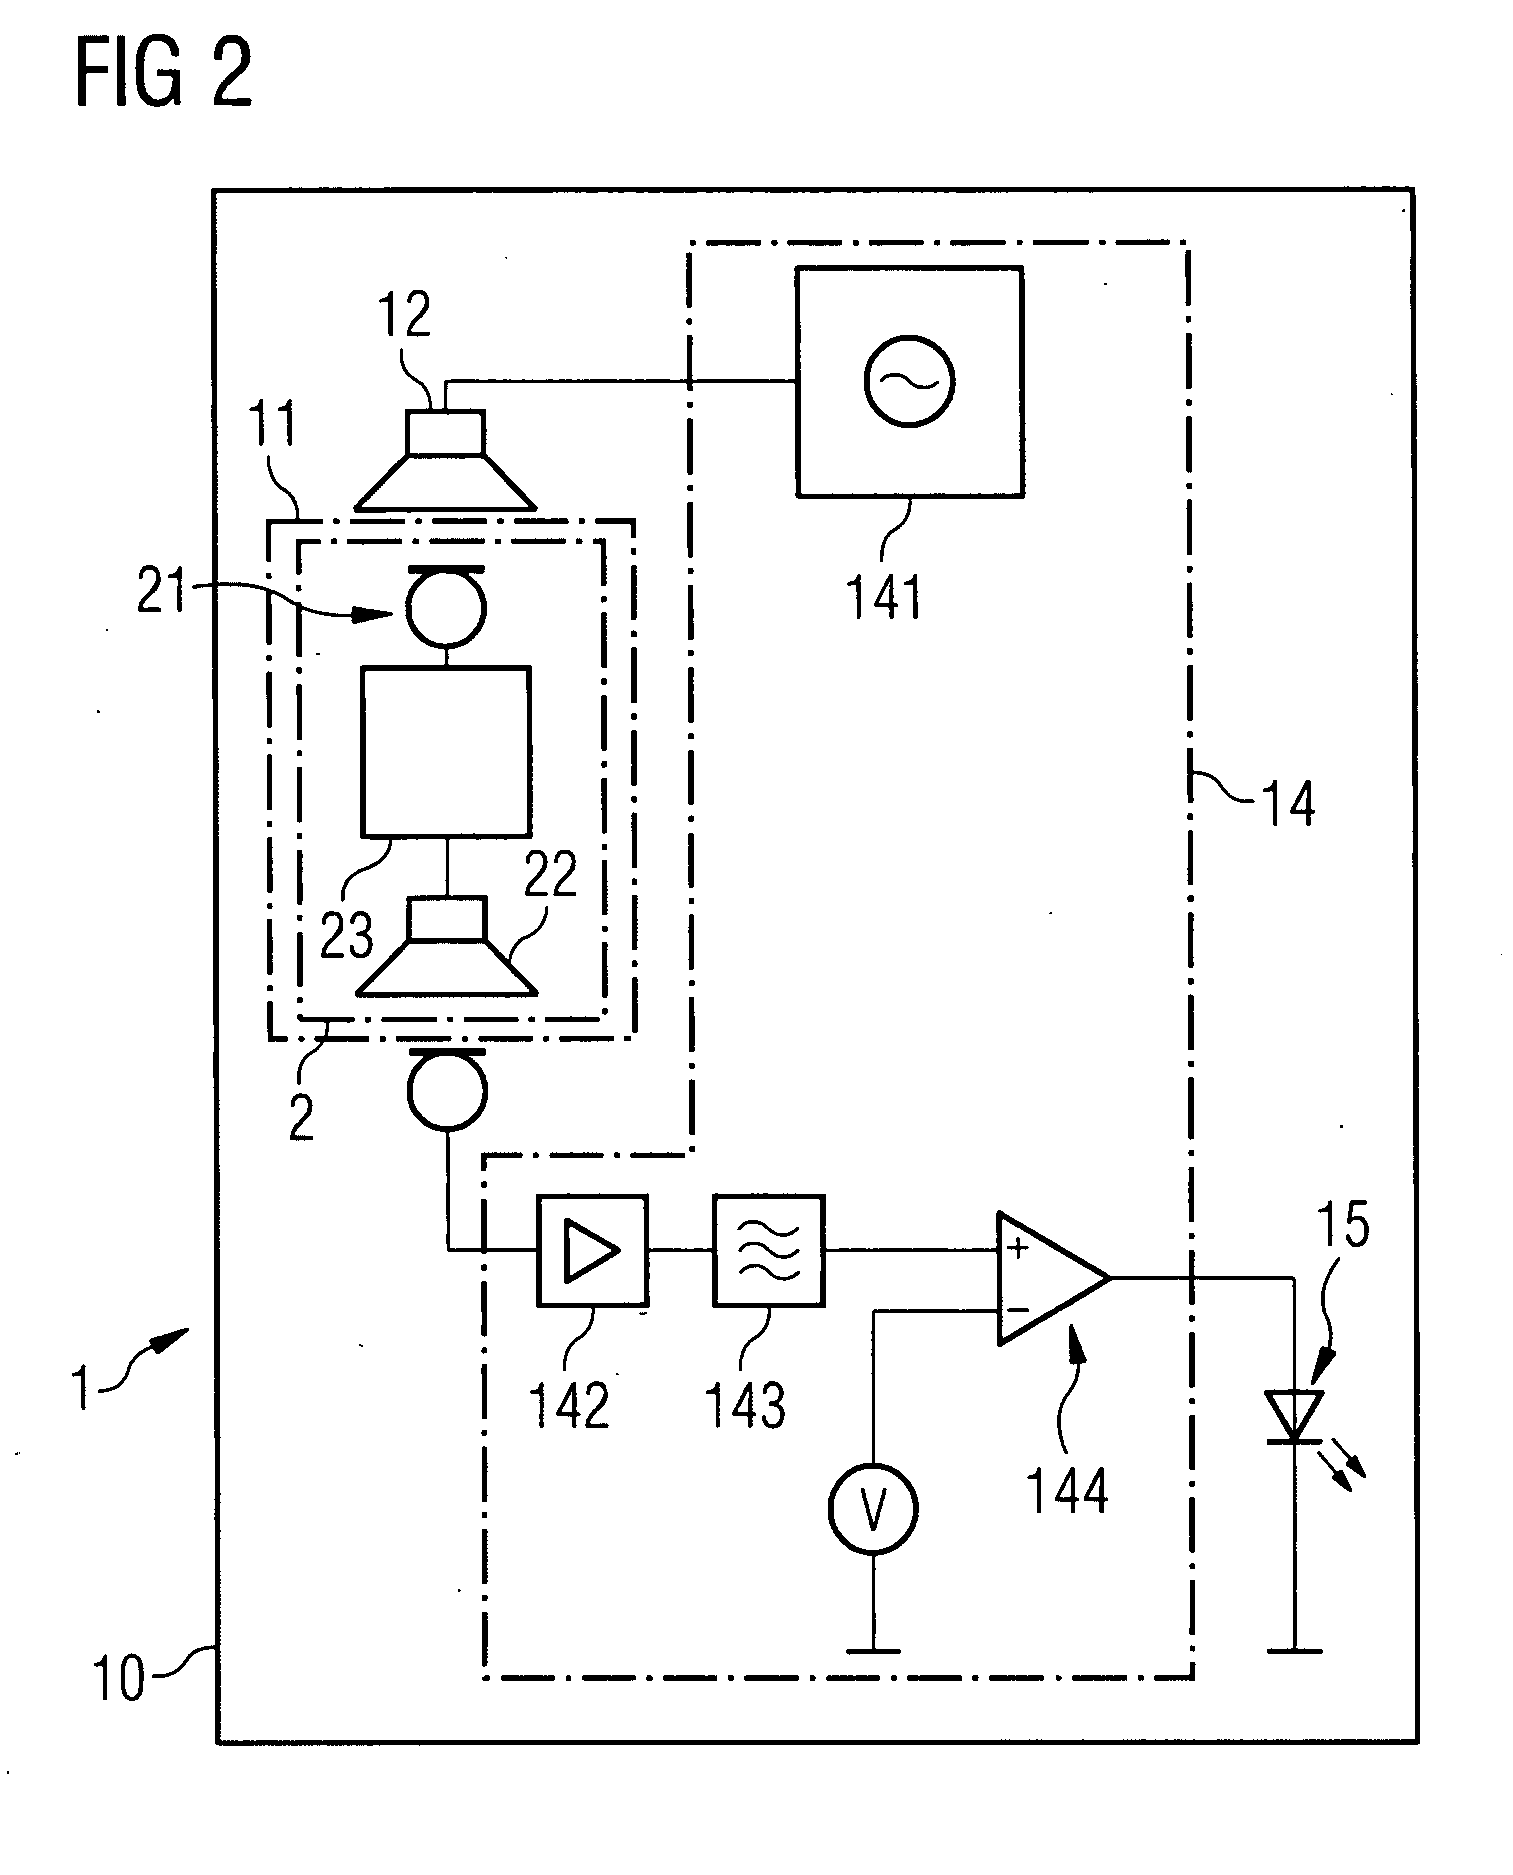 Compact test apparatus for hearing device